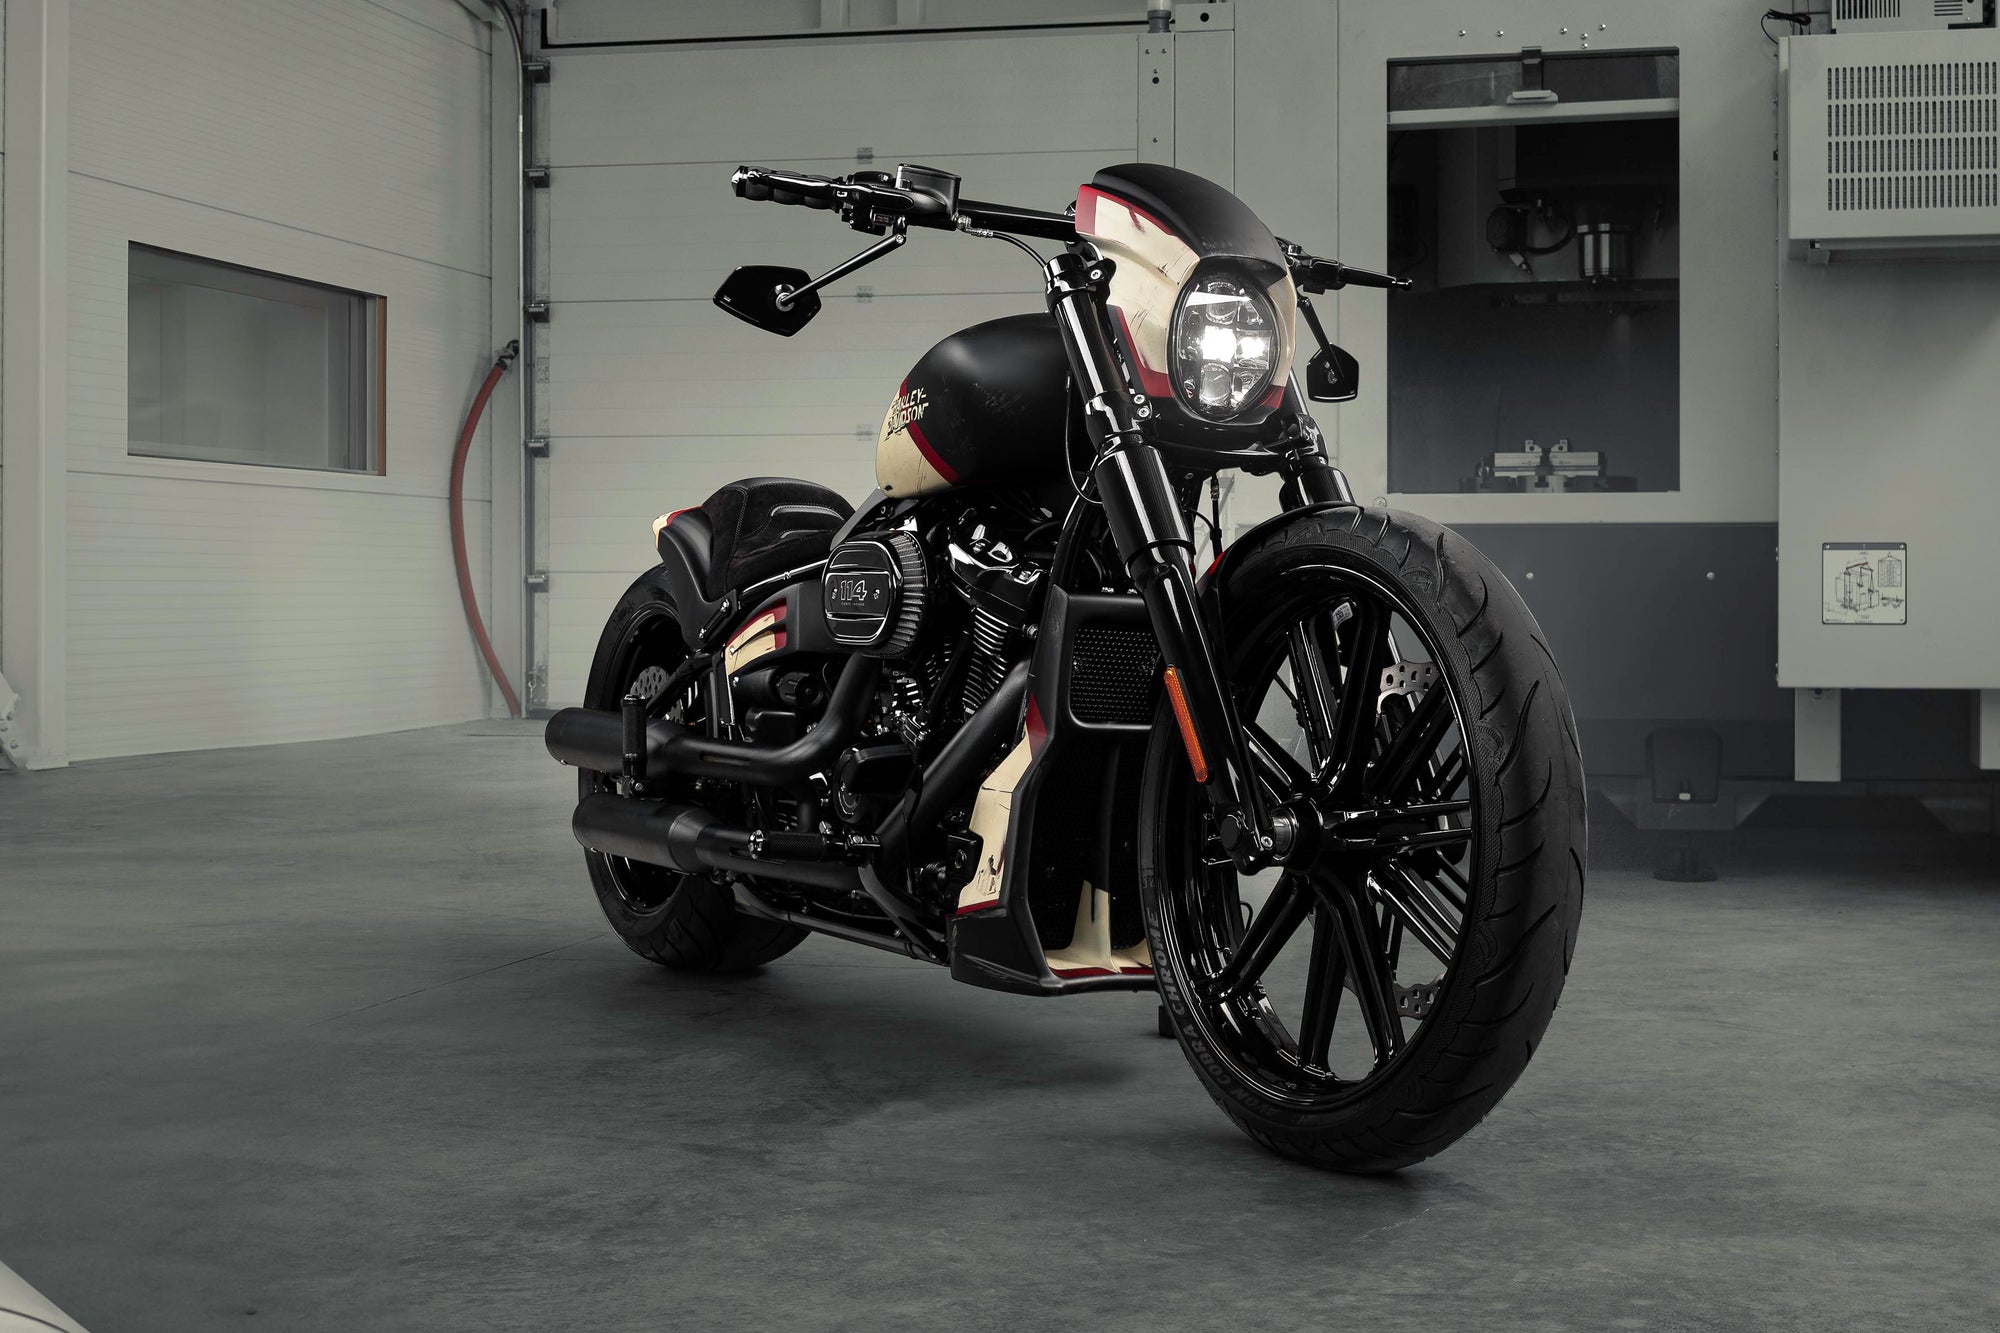 Modified Harley Davidson Breakout motorcycle with Killer Custom parts from the front in a modern bike shop